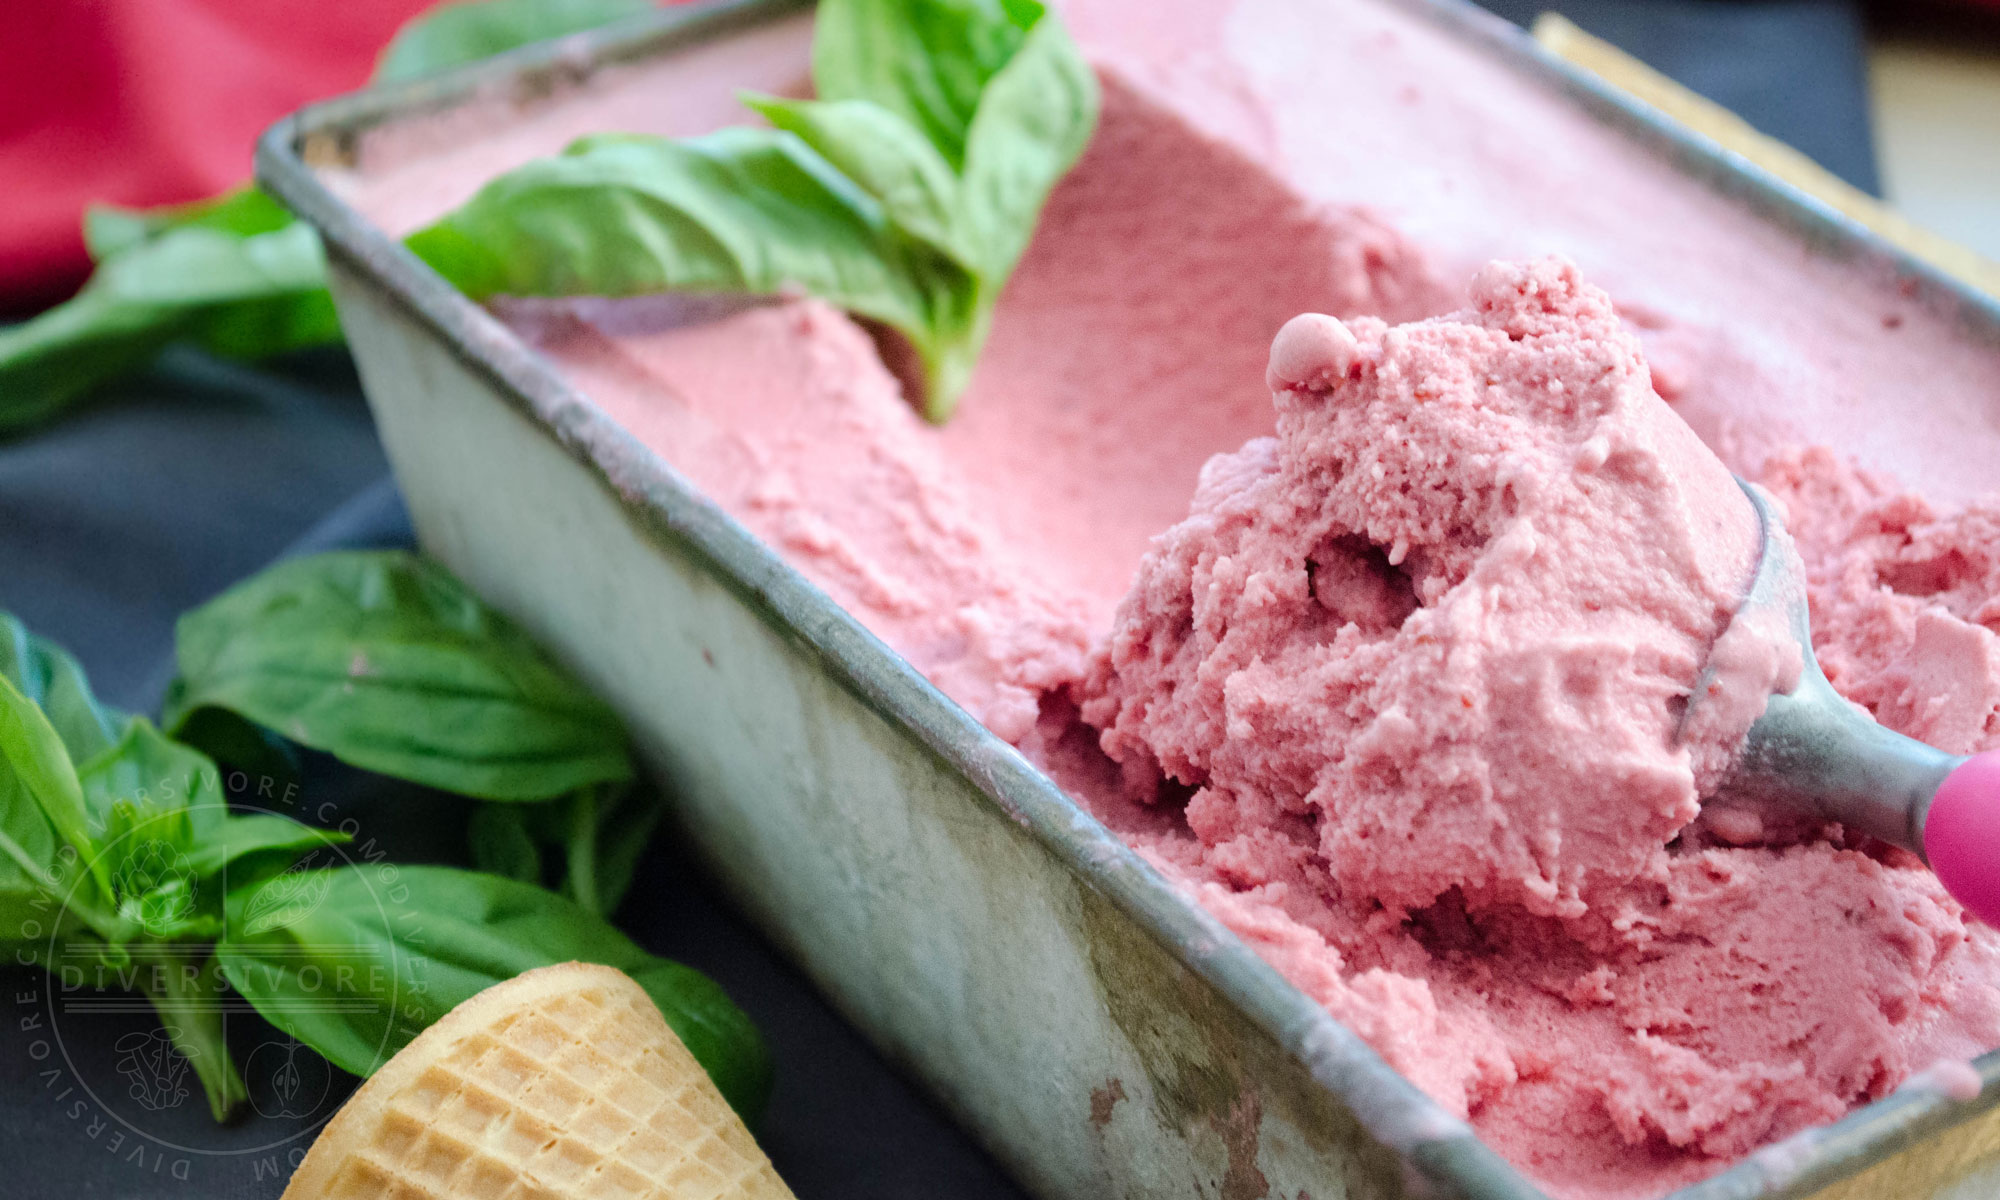 A scoop being taken out of a container of strawberry, basil, and goat cheese ice cream, decorated with basil leaves